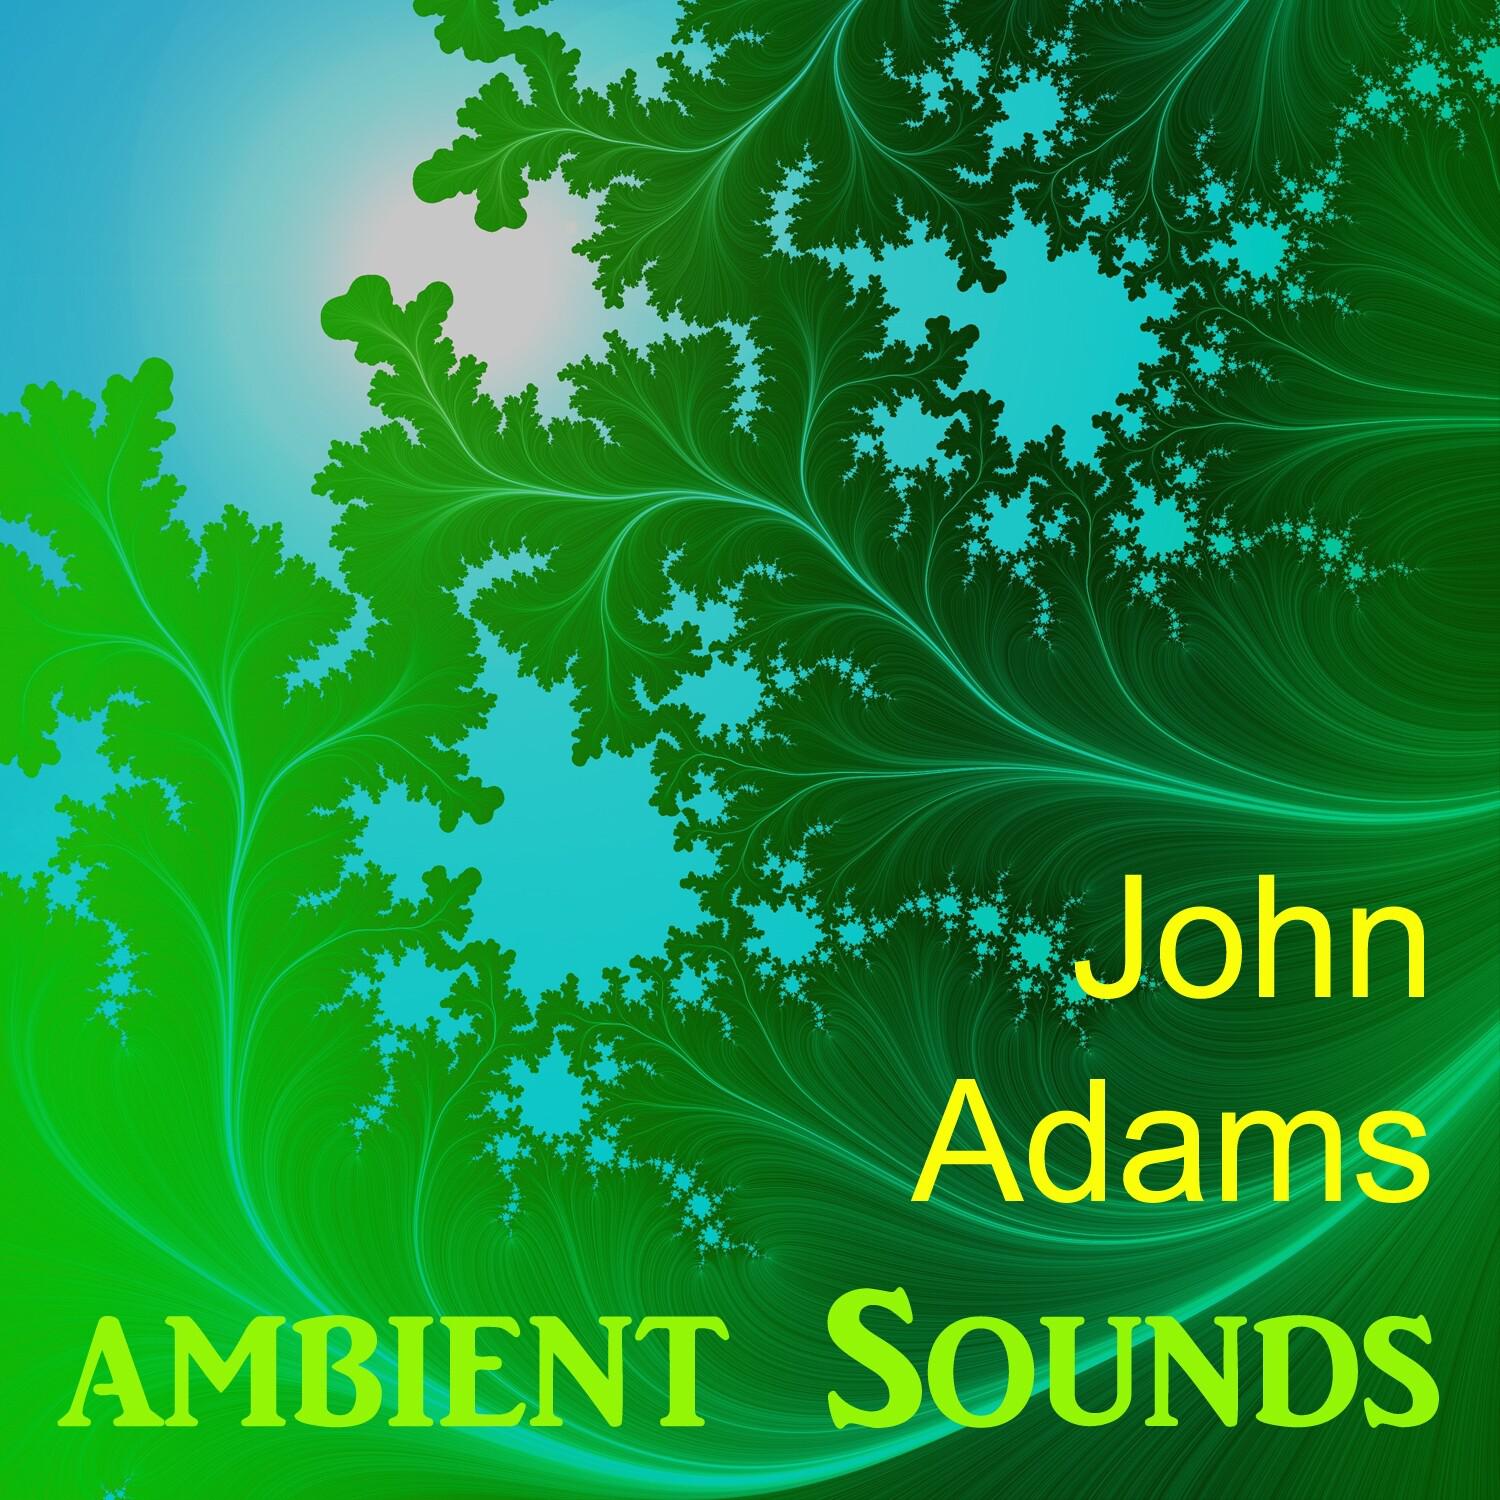 Ambient Environmental Sounds